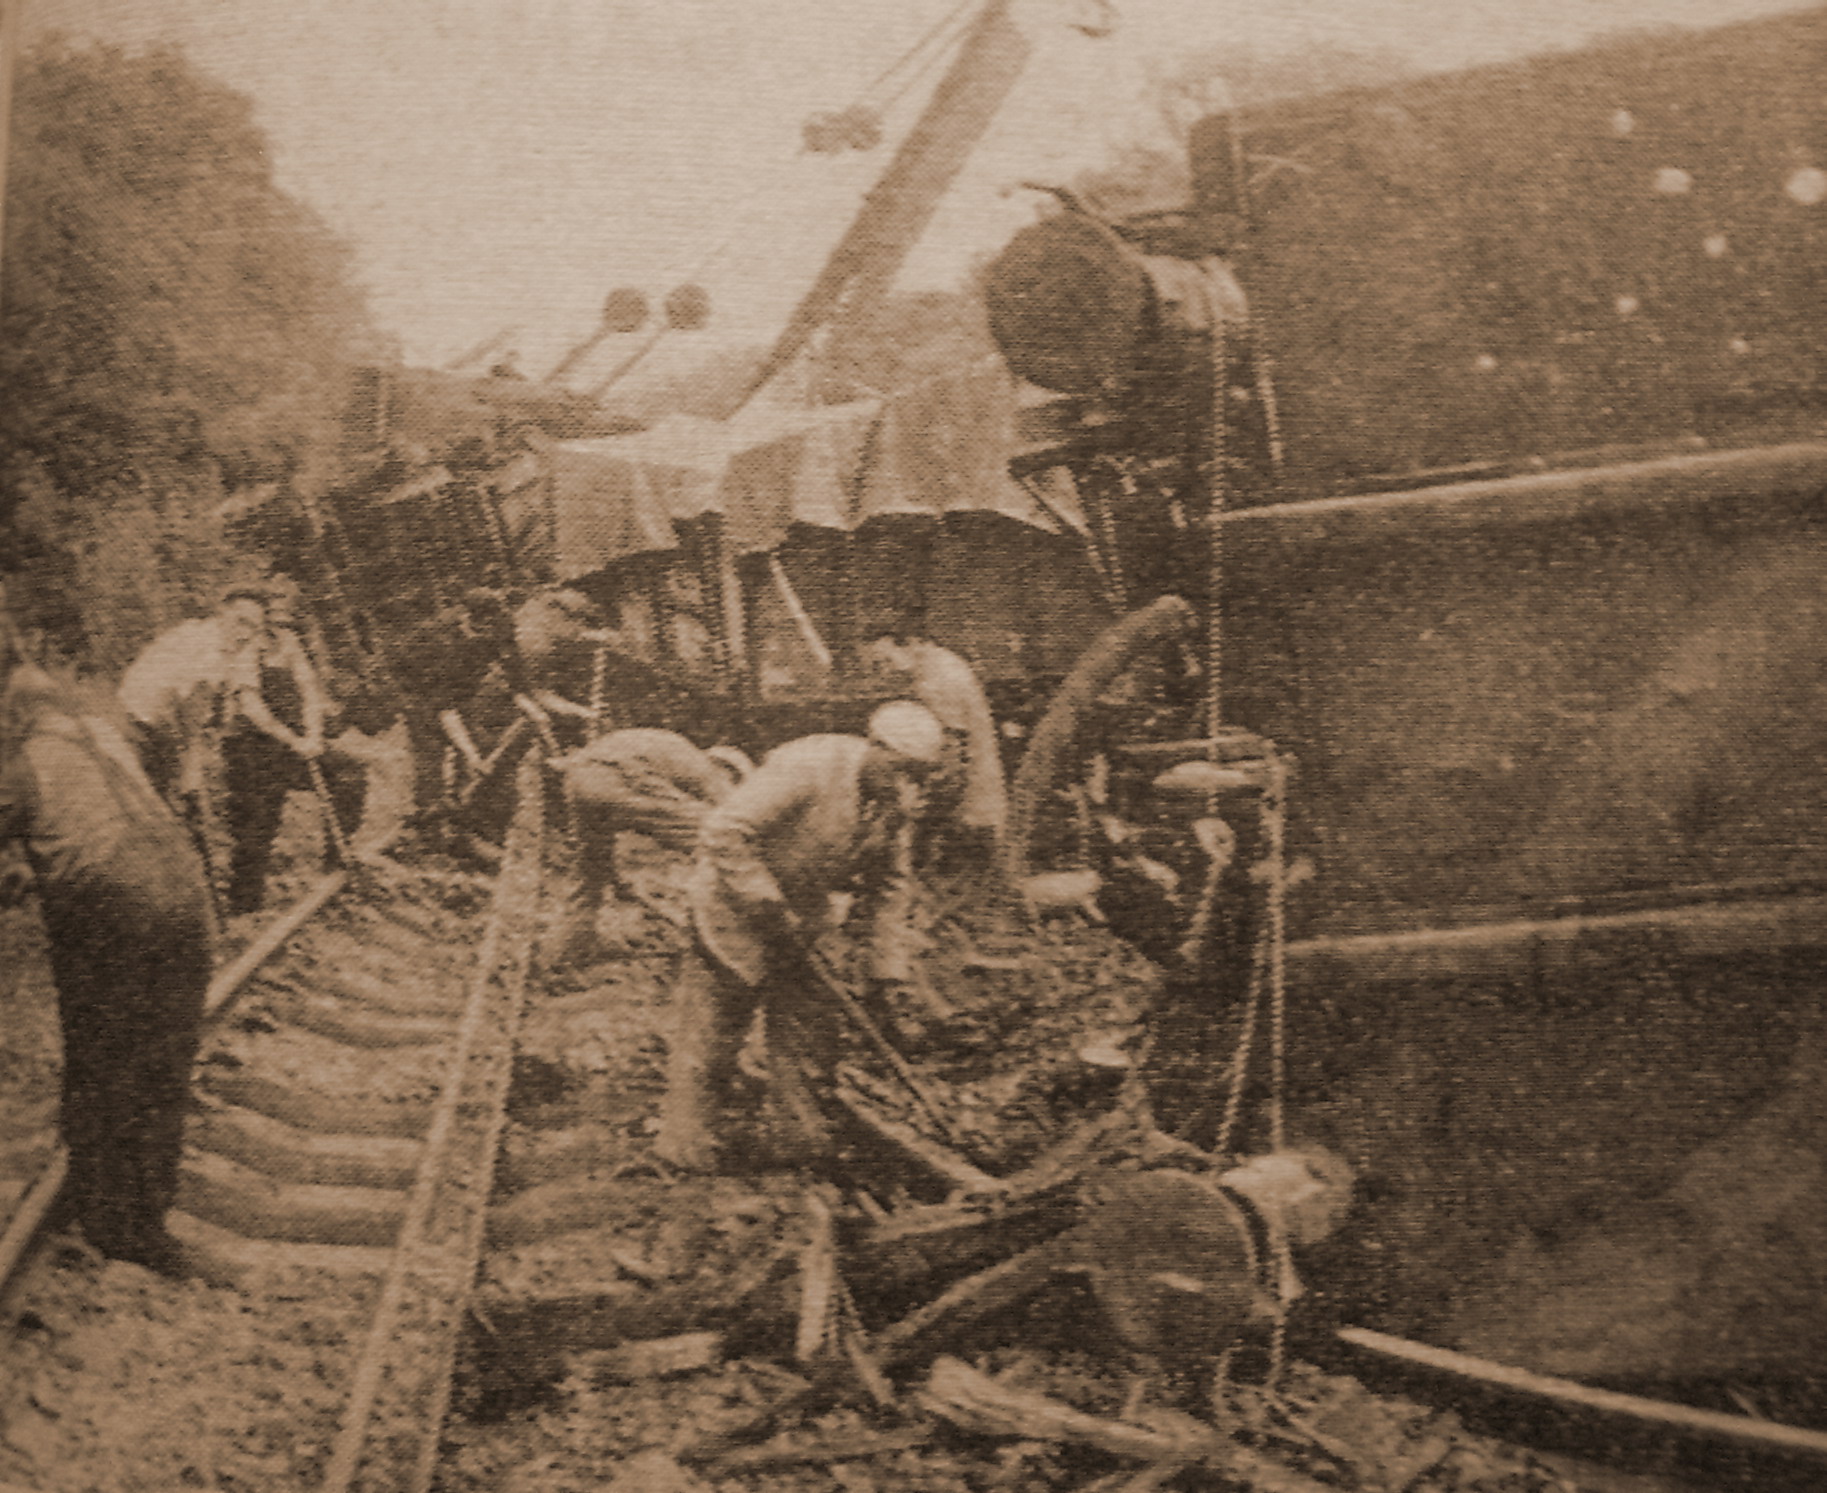 Some of the 33 derailed wagons